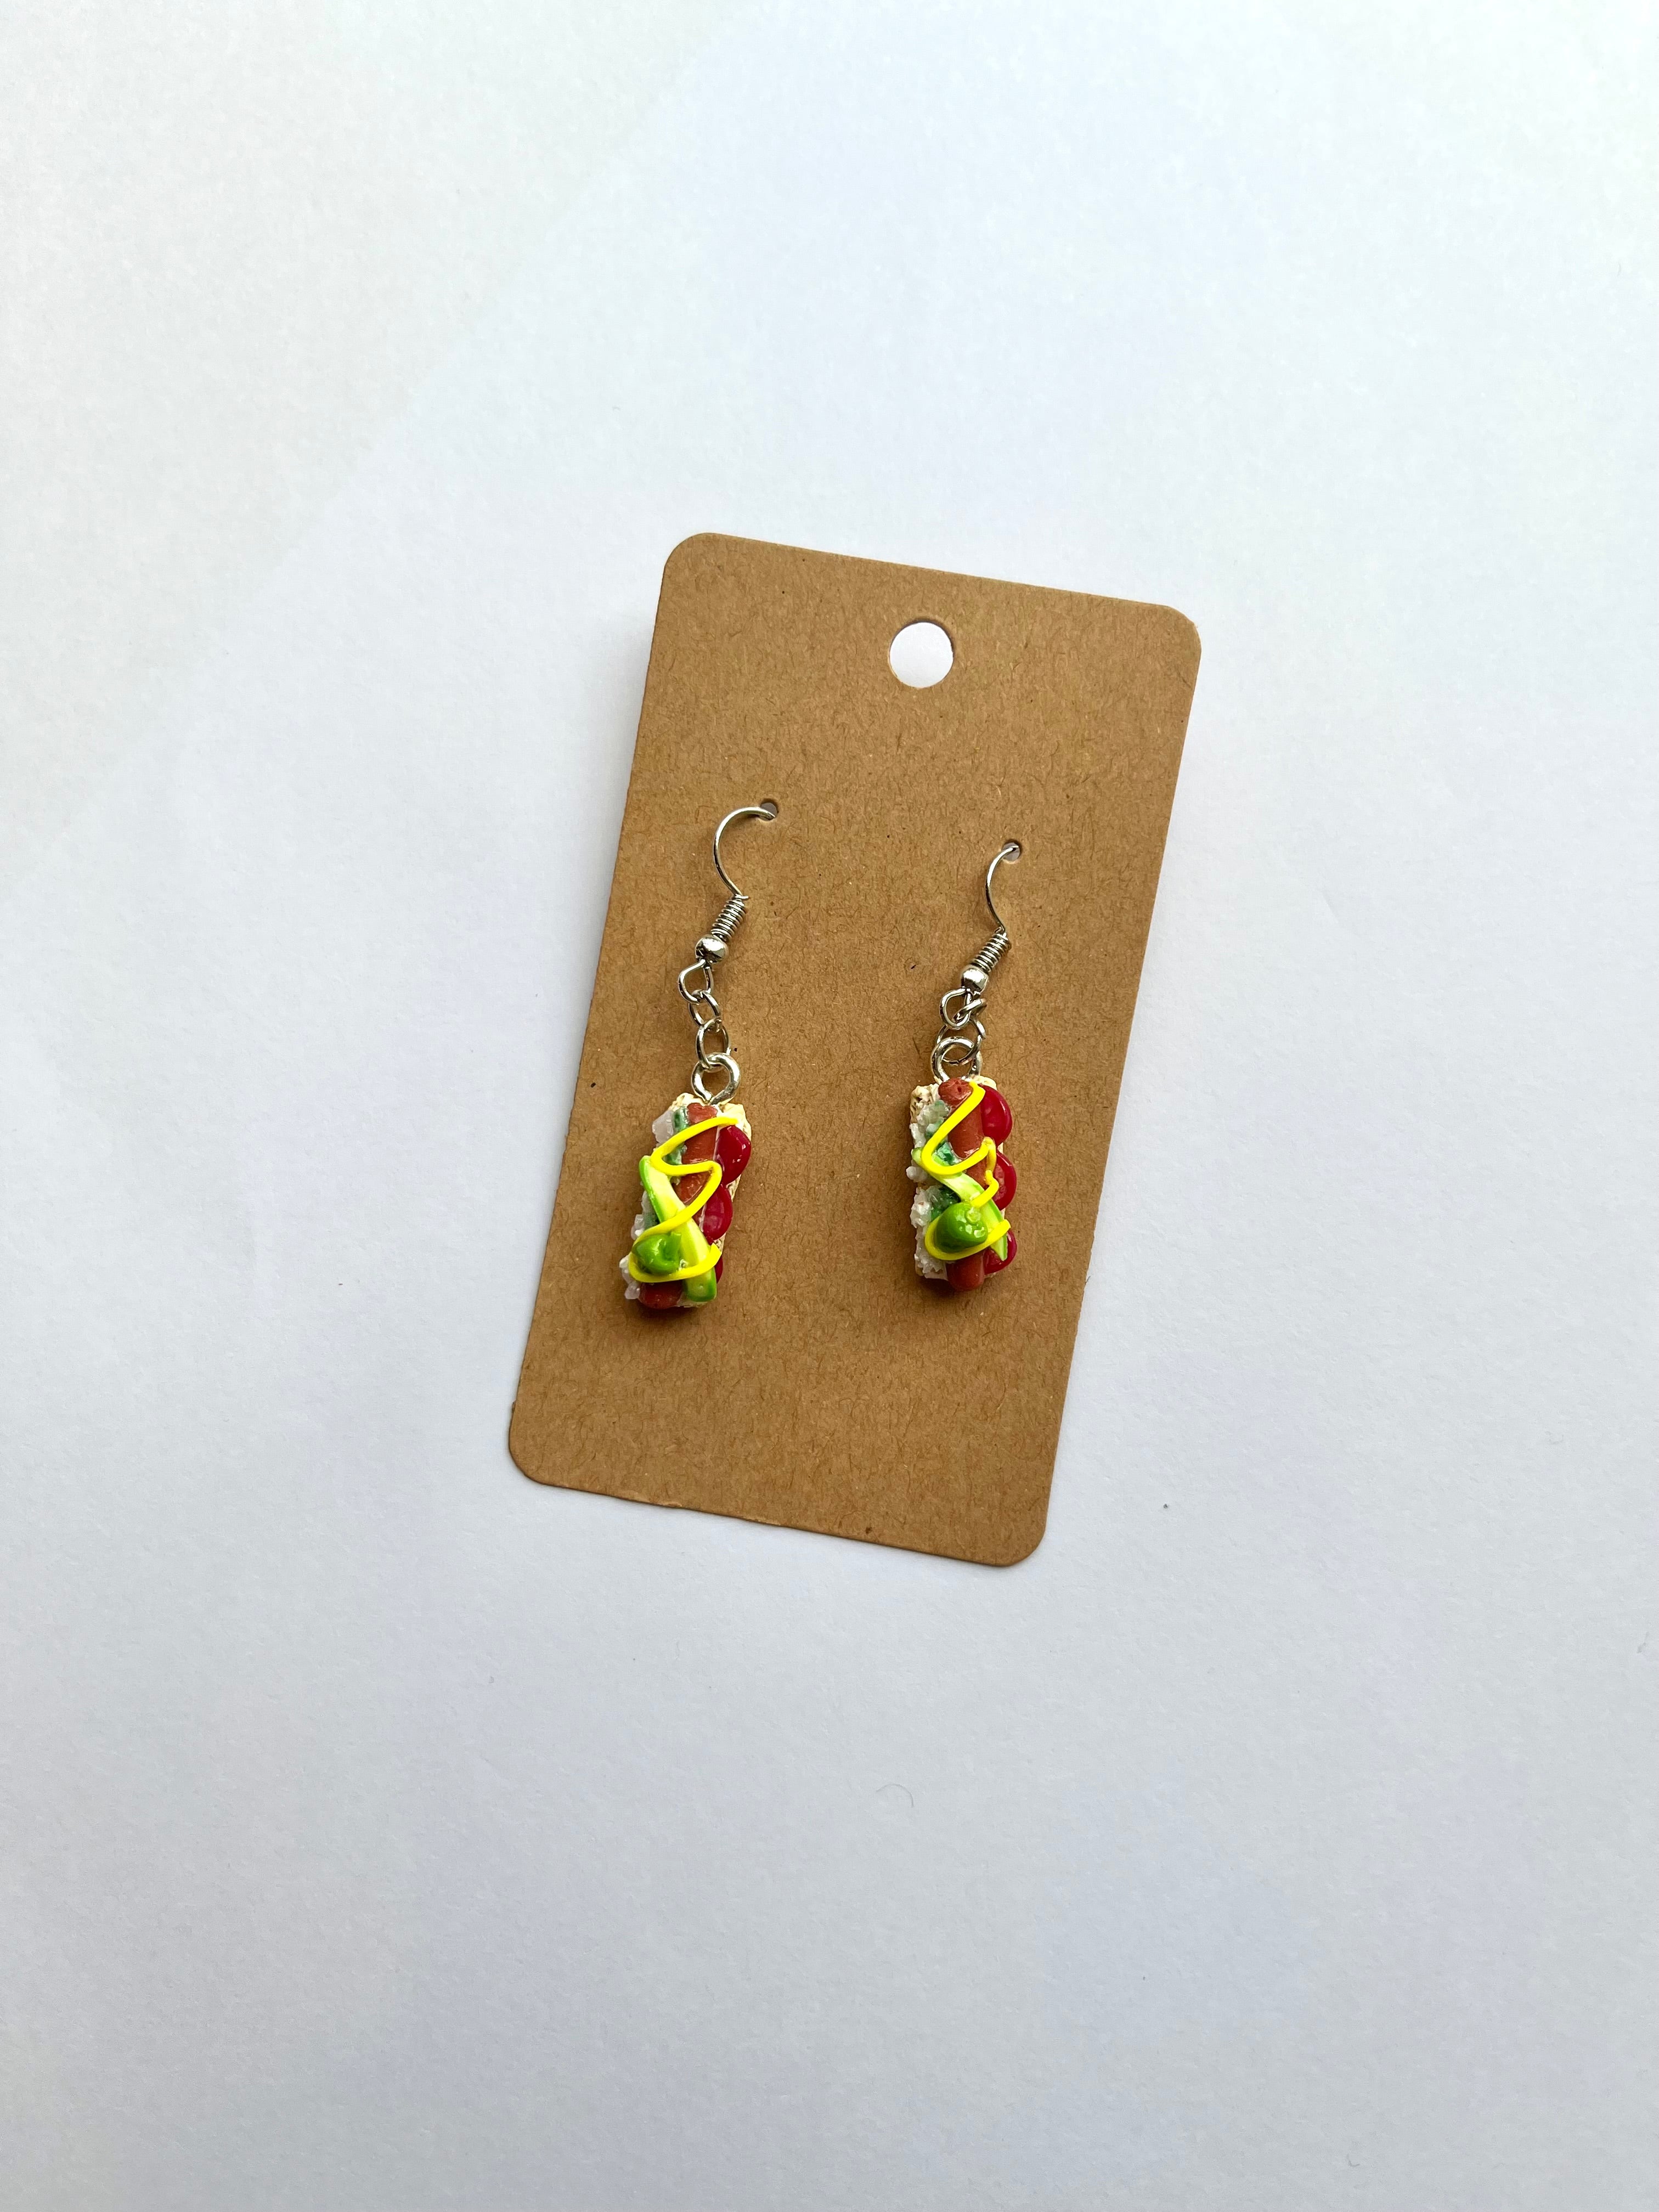 Chicago Style Hot Dog Earrings